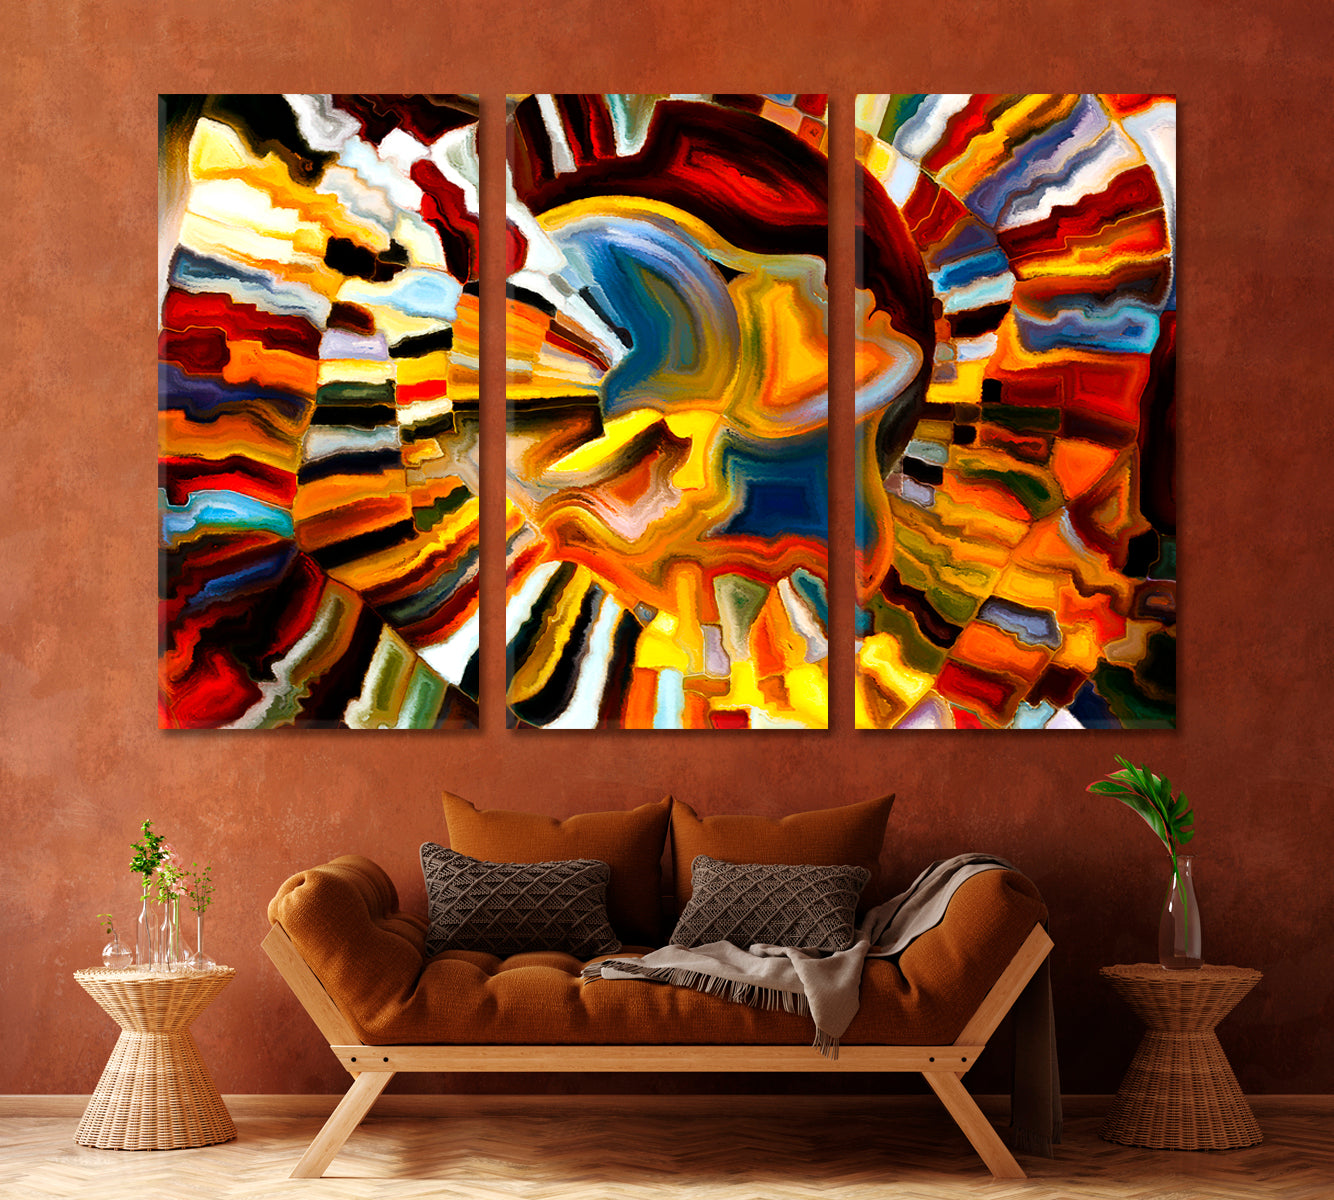 Contemporary Abstraction Contemporary Art Artesty 3 panels 36" x 24" 